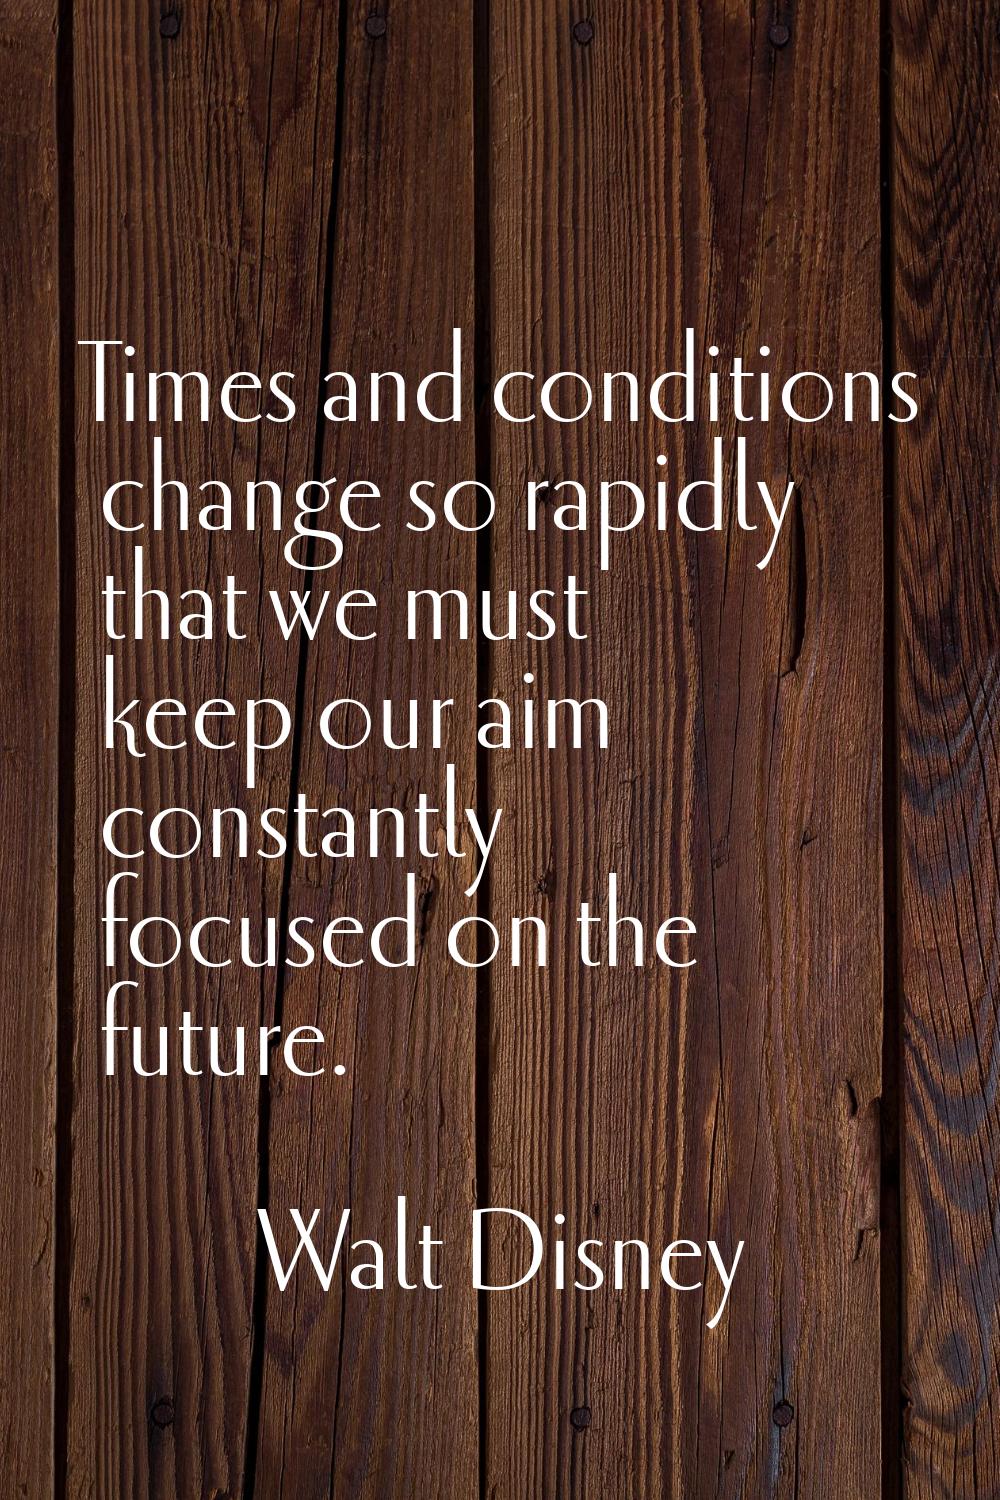 Times and conditions change so rapidly that we must keep our aim constantly focused on the future.